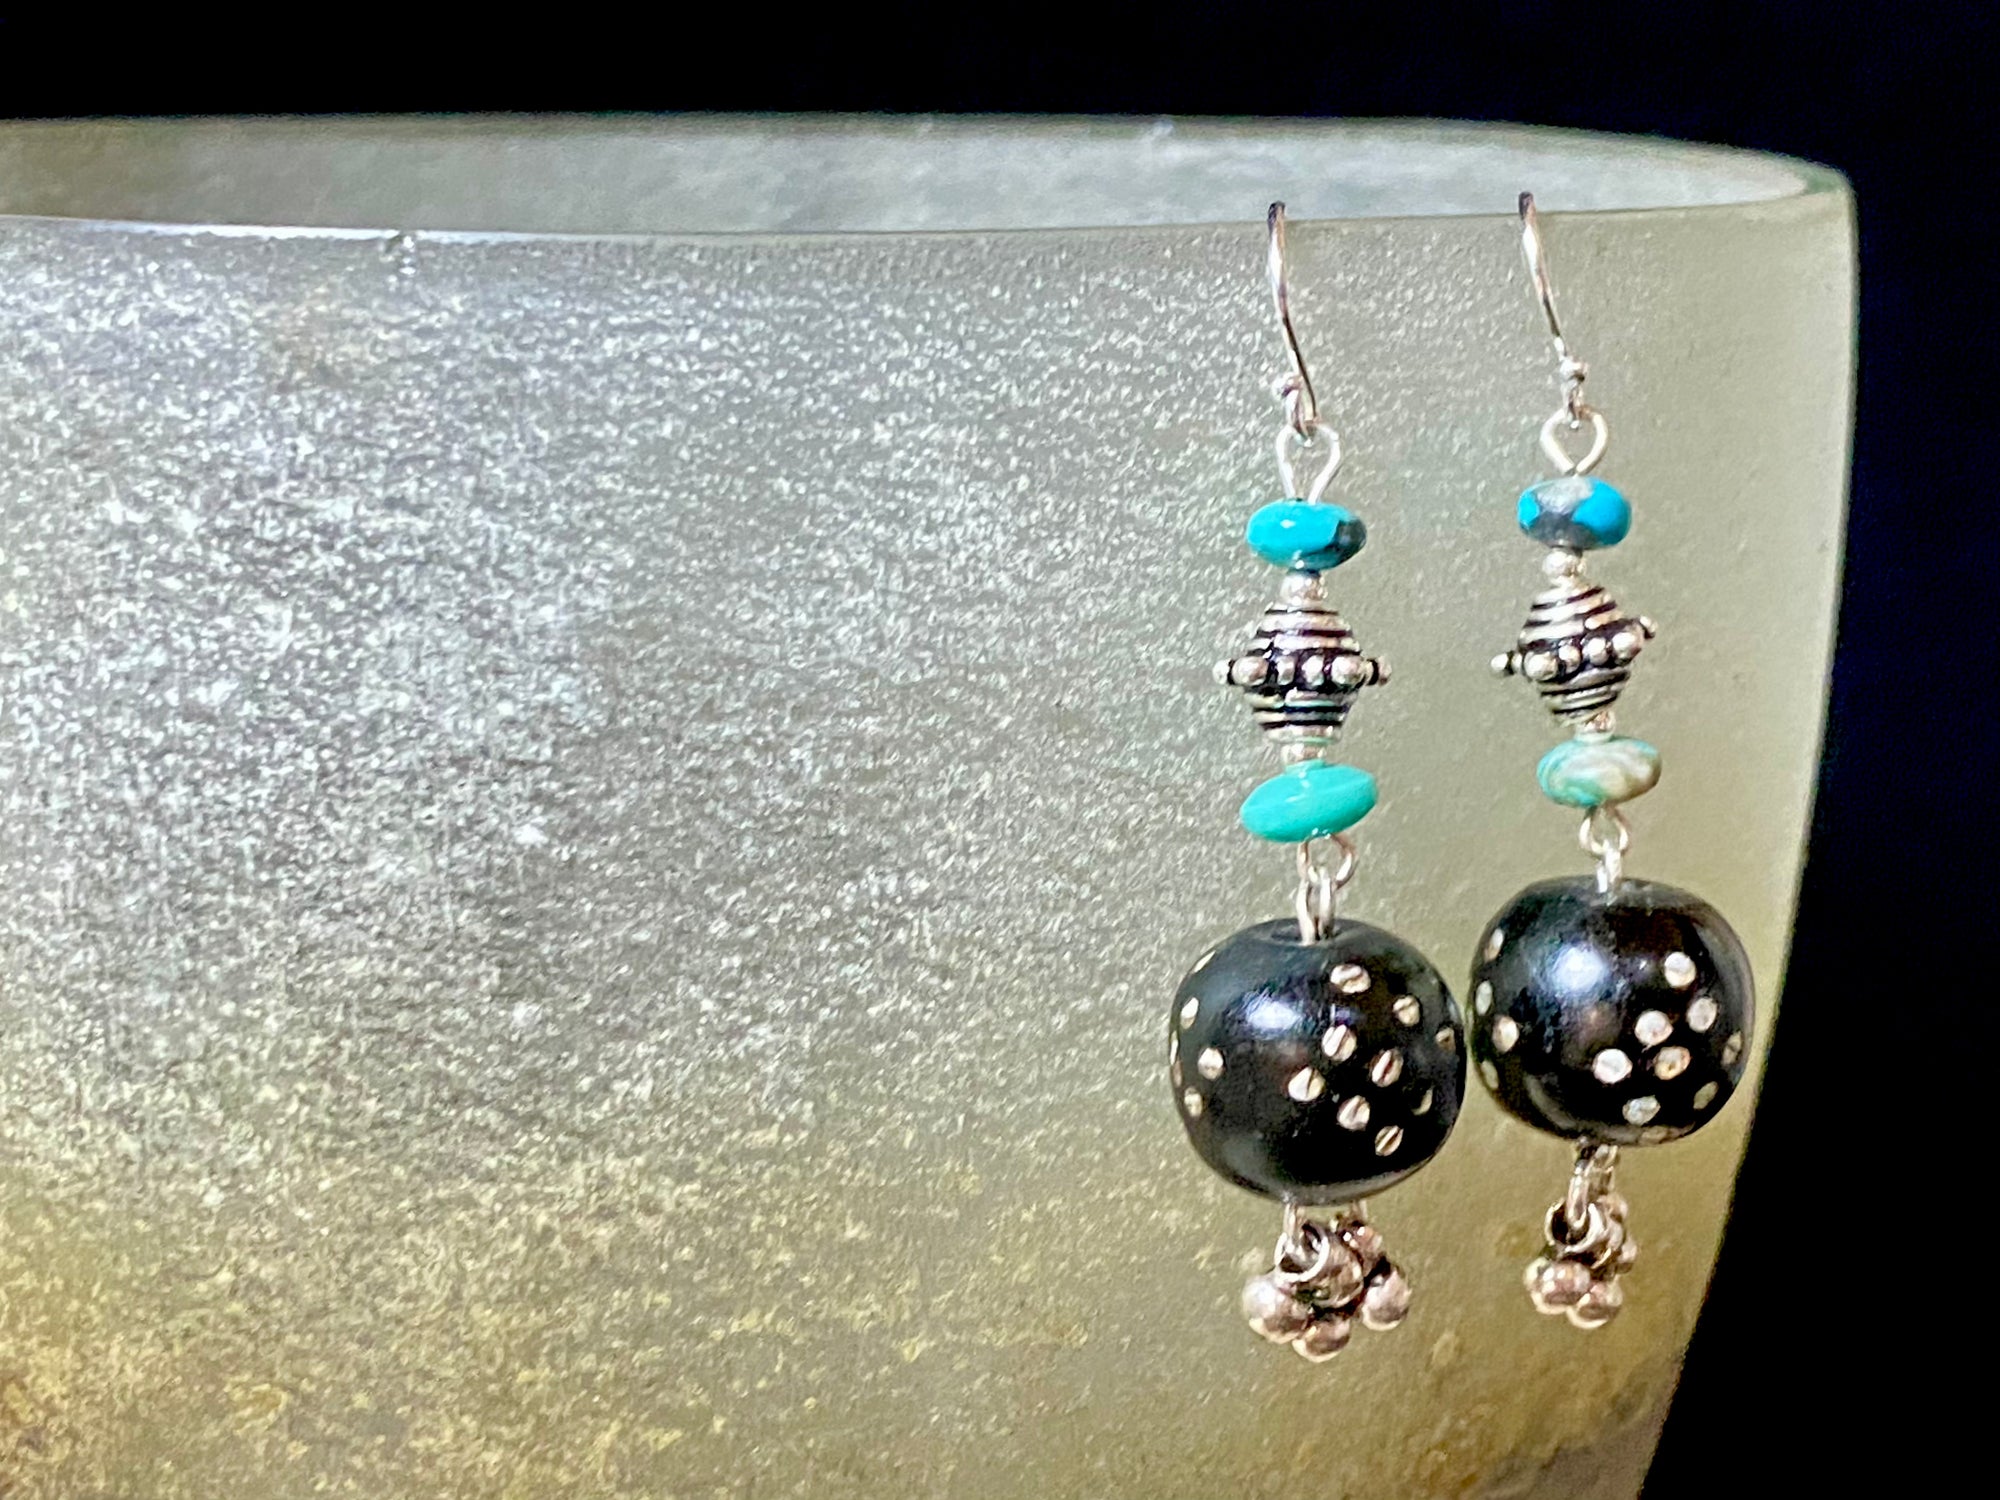 These statement earrings were created from vintage Yemeni black wood beads inlaid with silver. They are finished with Arizona turquoise and sterling silver handmade beads & hooks. A one-off earring design that's light and easy to wear. Length 5 cm including hook, and the inlay beads are approximately 12 mm in length.